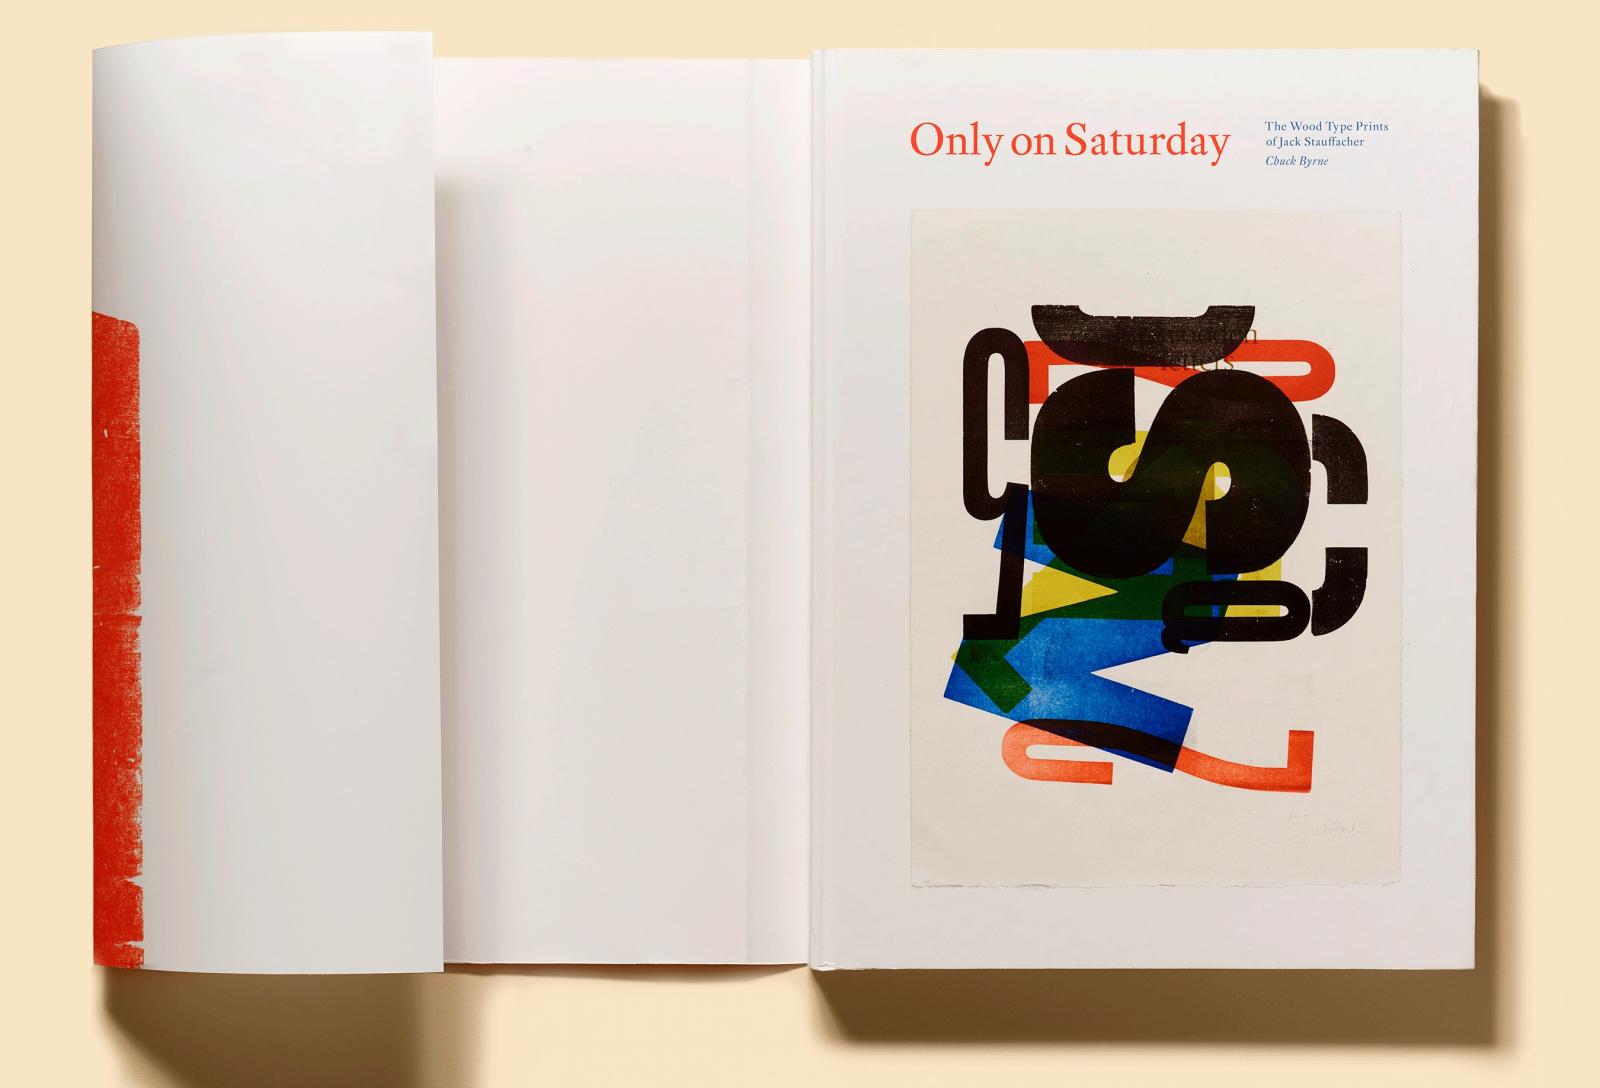 More information about "Only on Saturday: The Wood Type Prints of Jack Stauffacher"